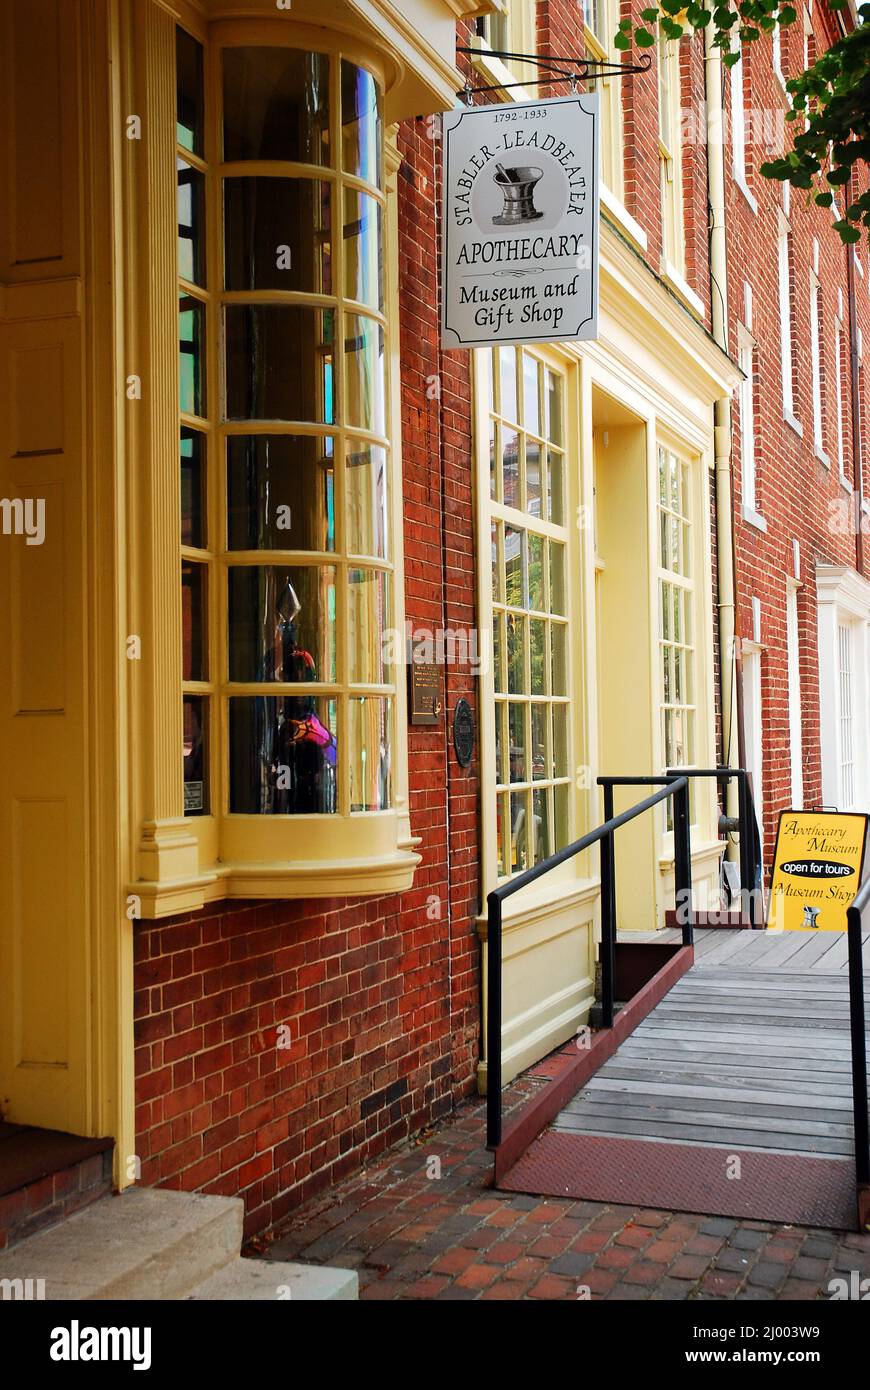 The historic Stabler Leadbeater Apothecary is now a museum in Alexandria, Virginia, demonstrating the colonial style pharmacy Stock Photo